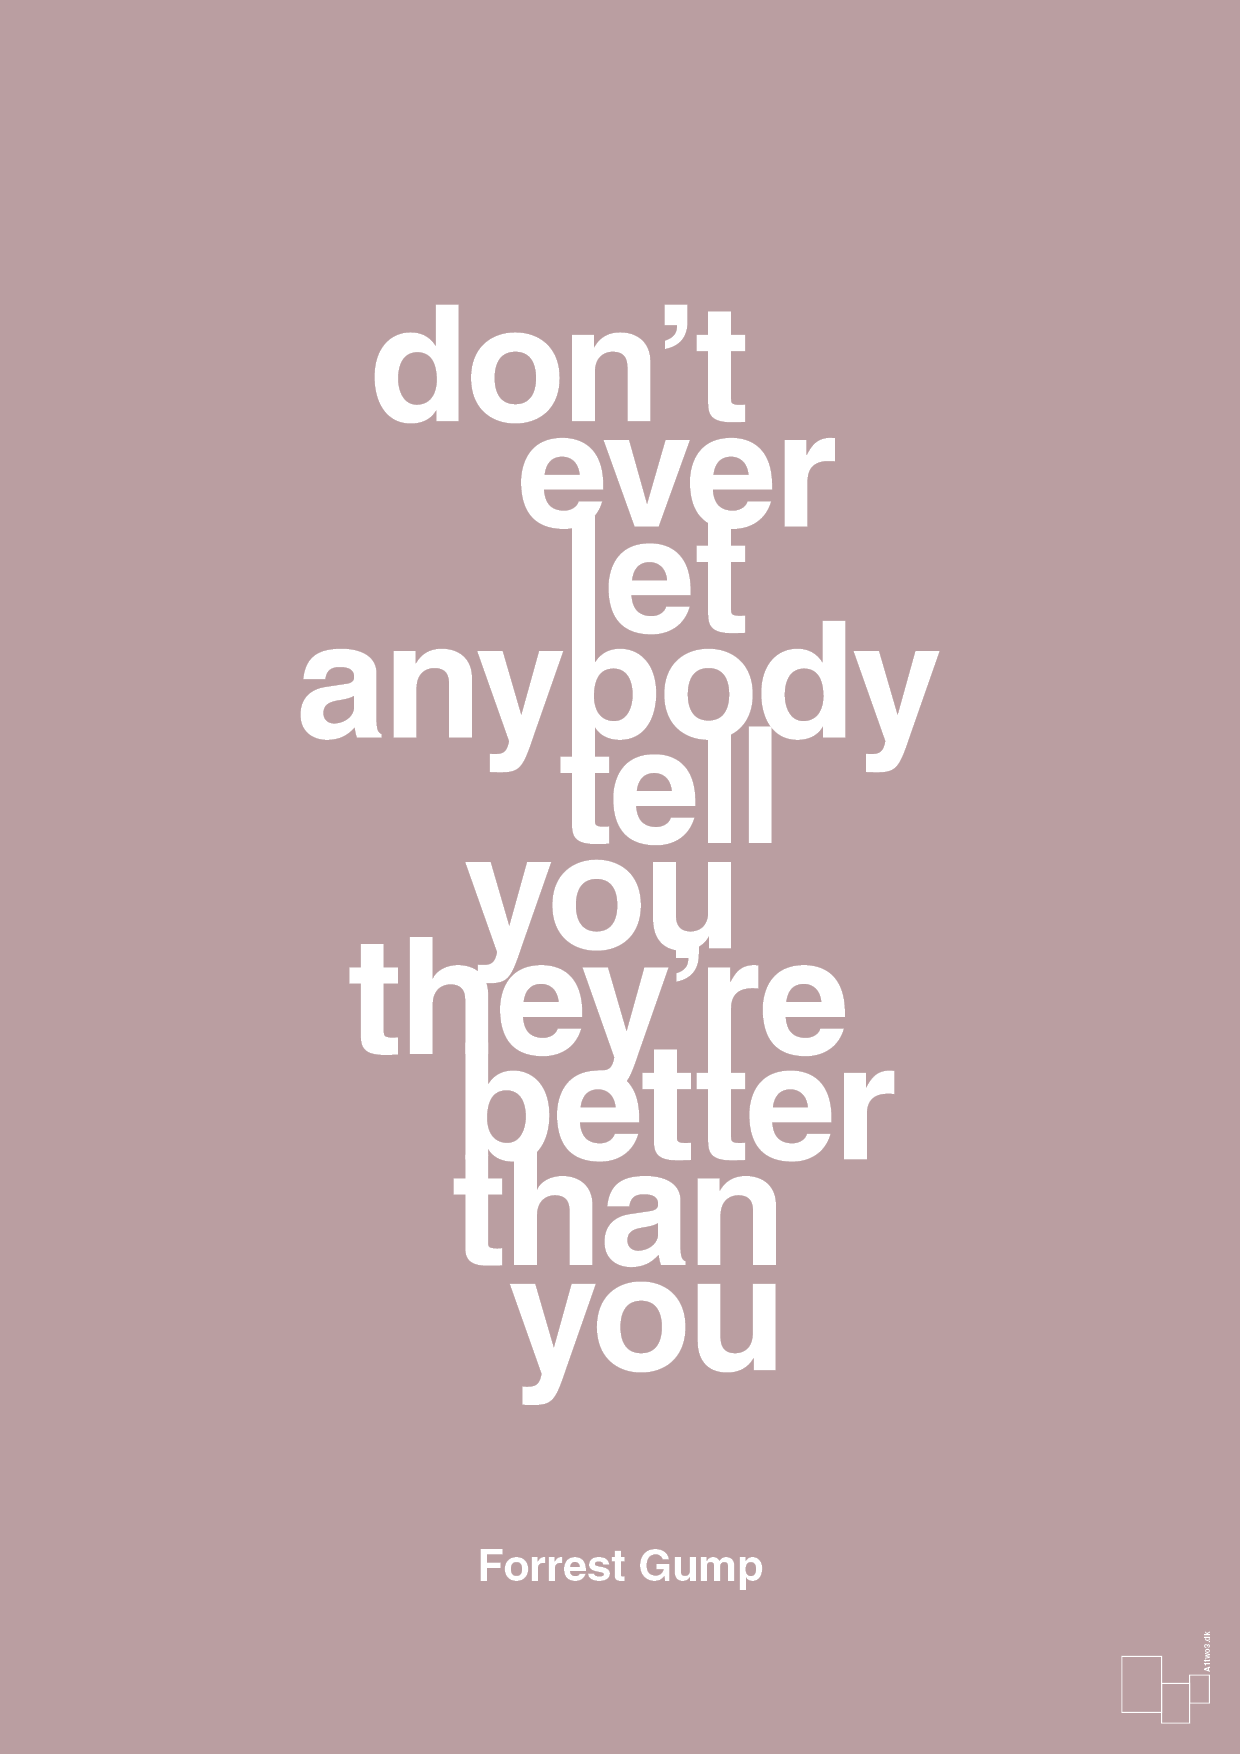 don’t ever let anybody tell you they’re better than you - Plakat med Citater i Light Rose